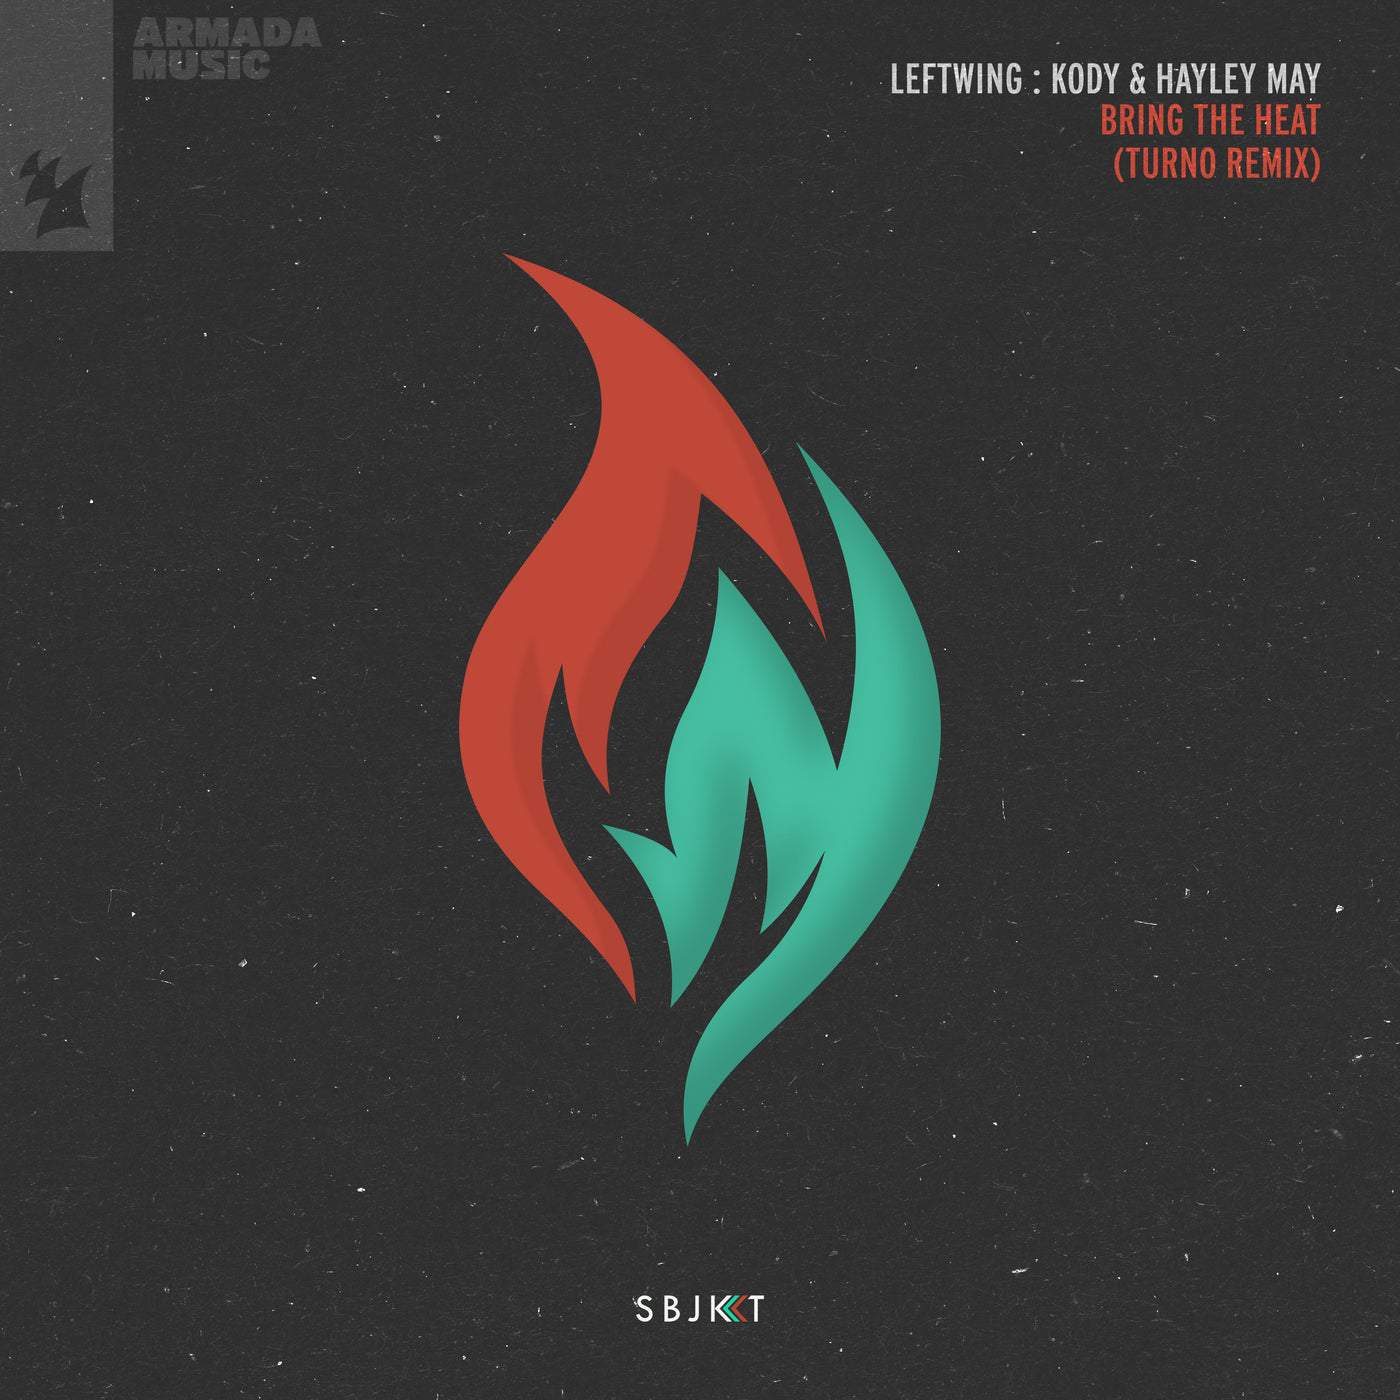 image cover: Leftwing : Kody, Hayley May - Bring The Heat - Turno Remix on Armada Subjekt